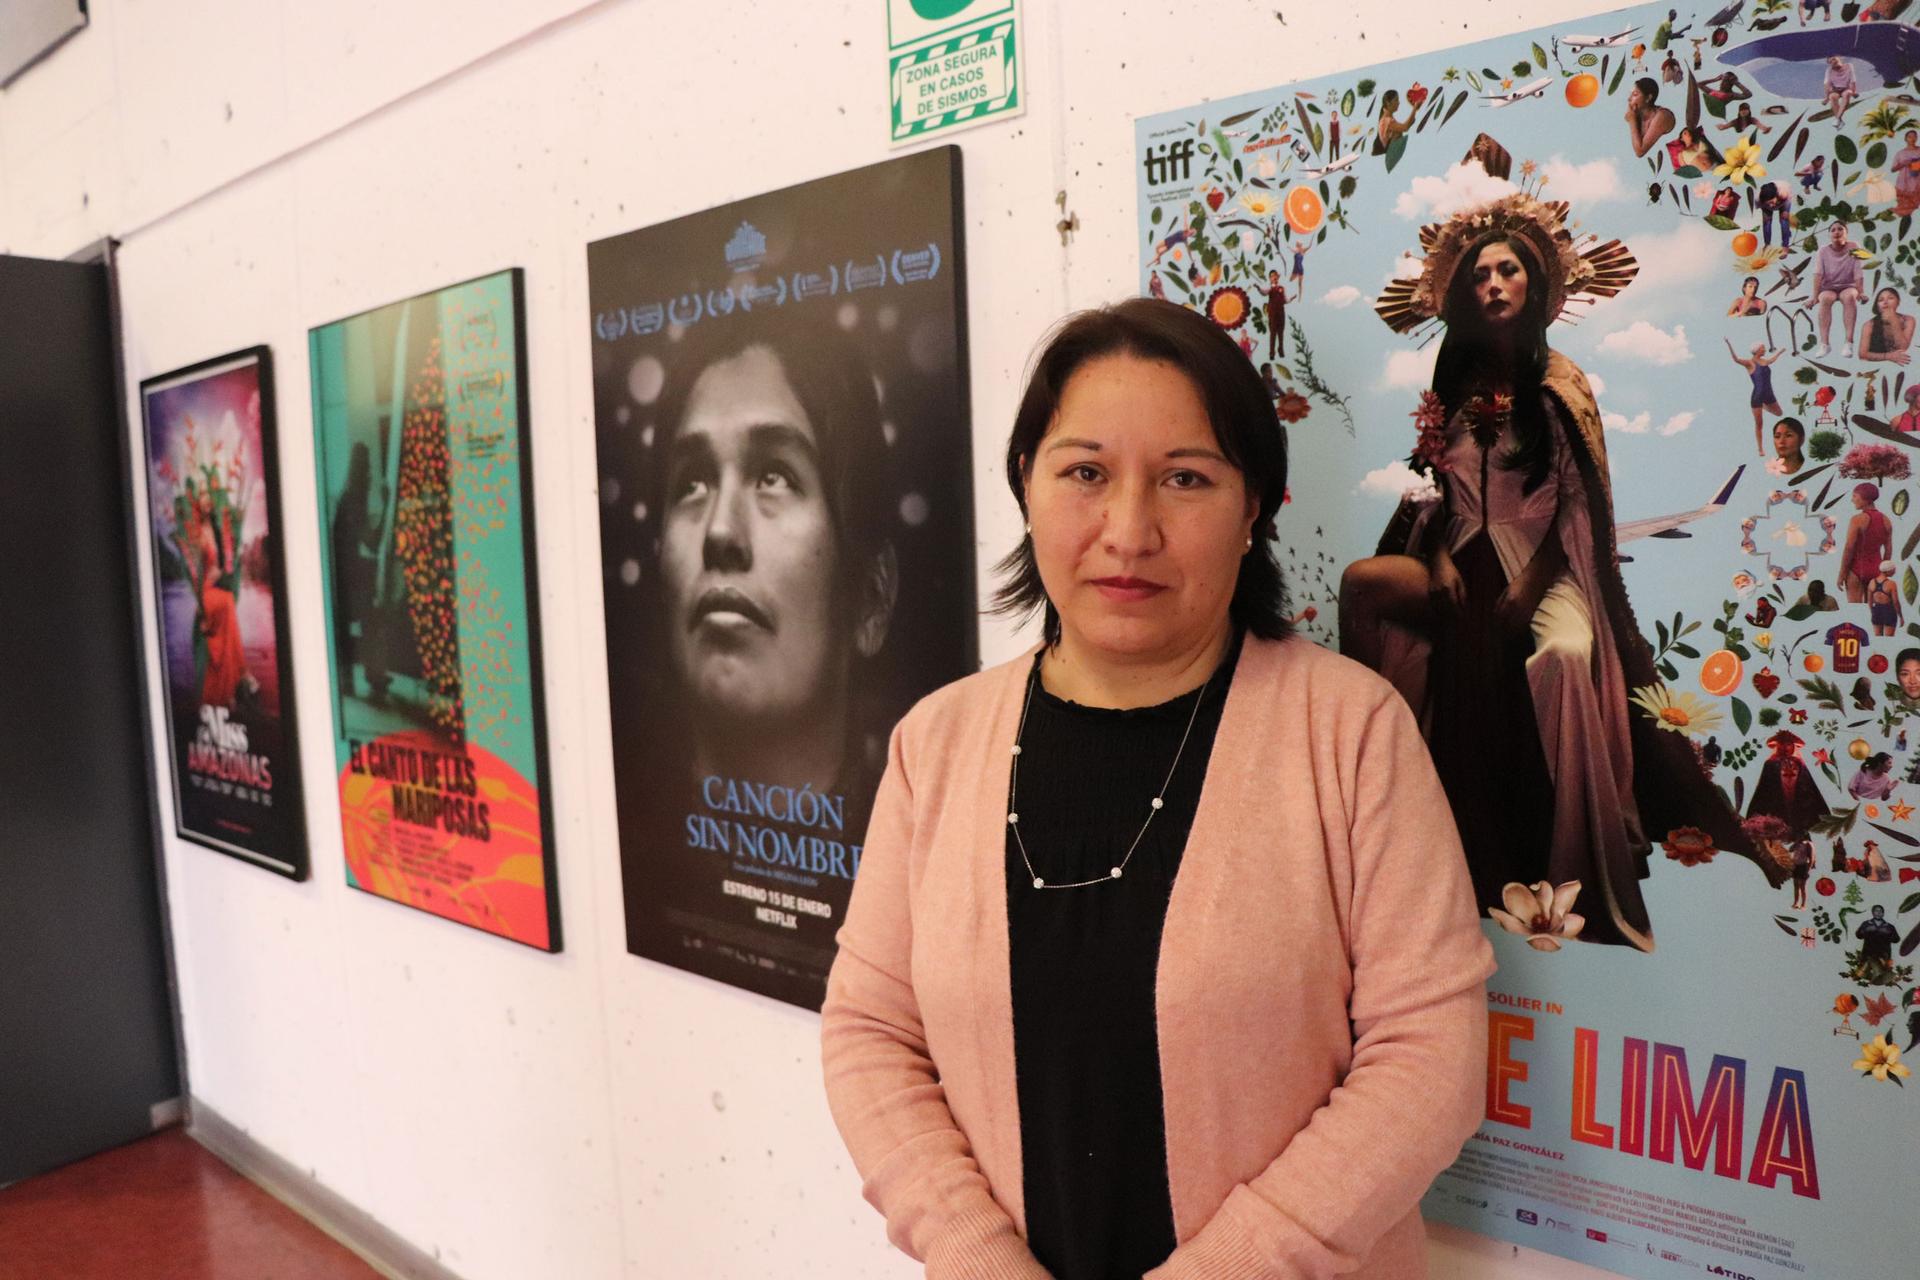 Erika Chávez, the director of Film and New Media at the Ministry of Culture of Peru, oversees a budget of about $6 million to fund productions, festivals and scholarships.